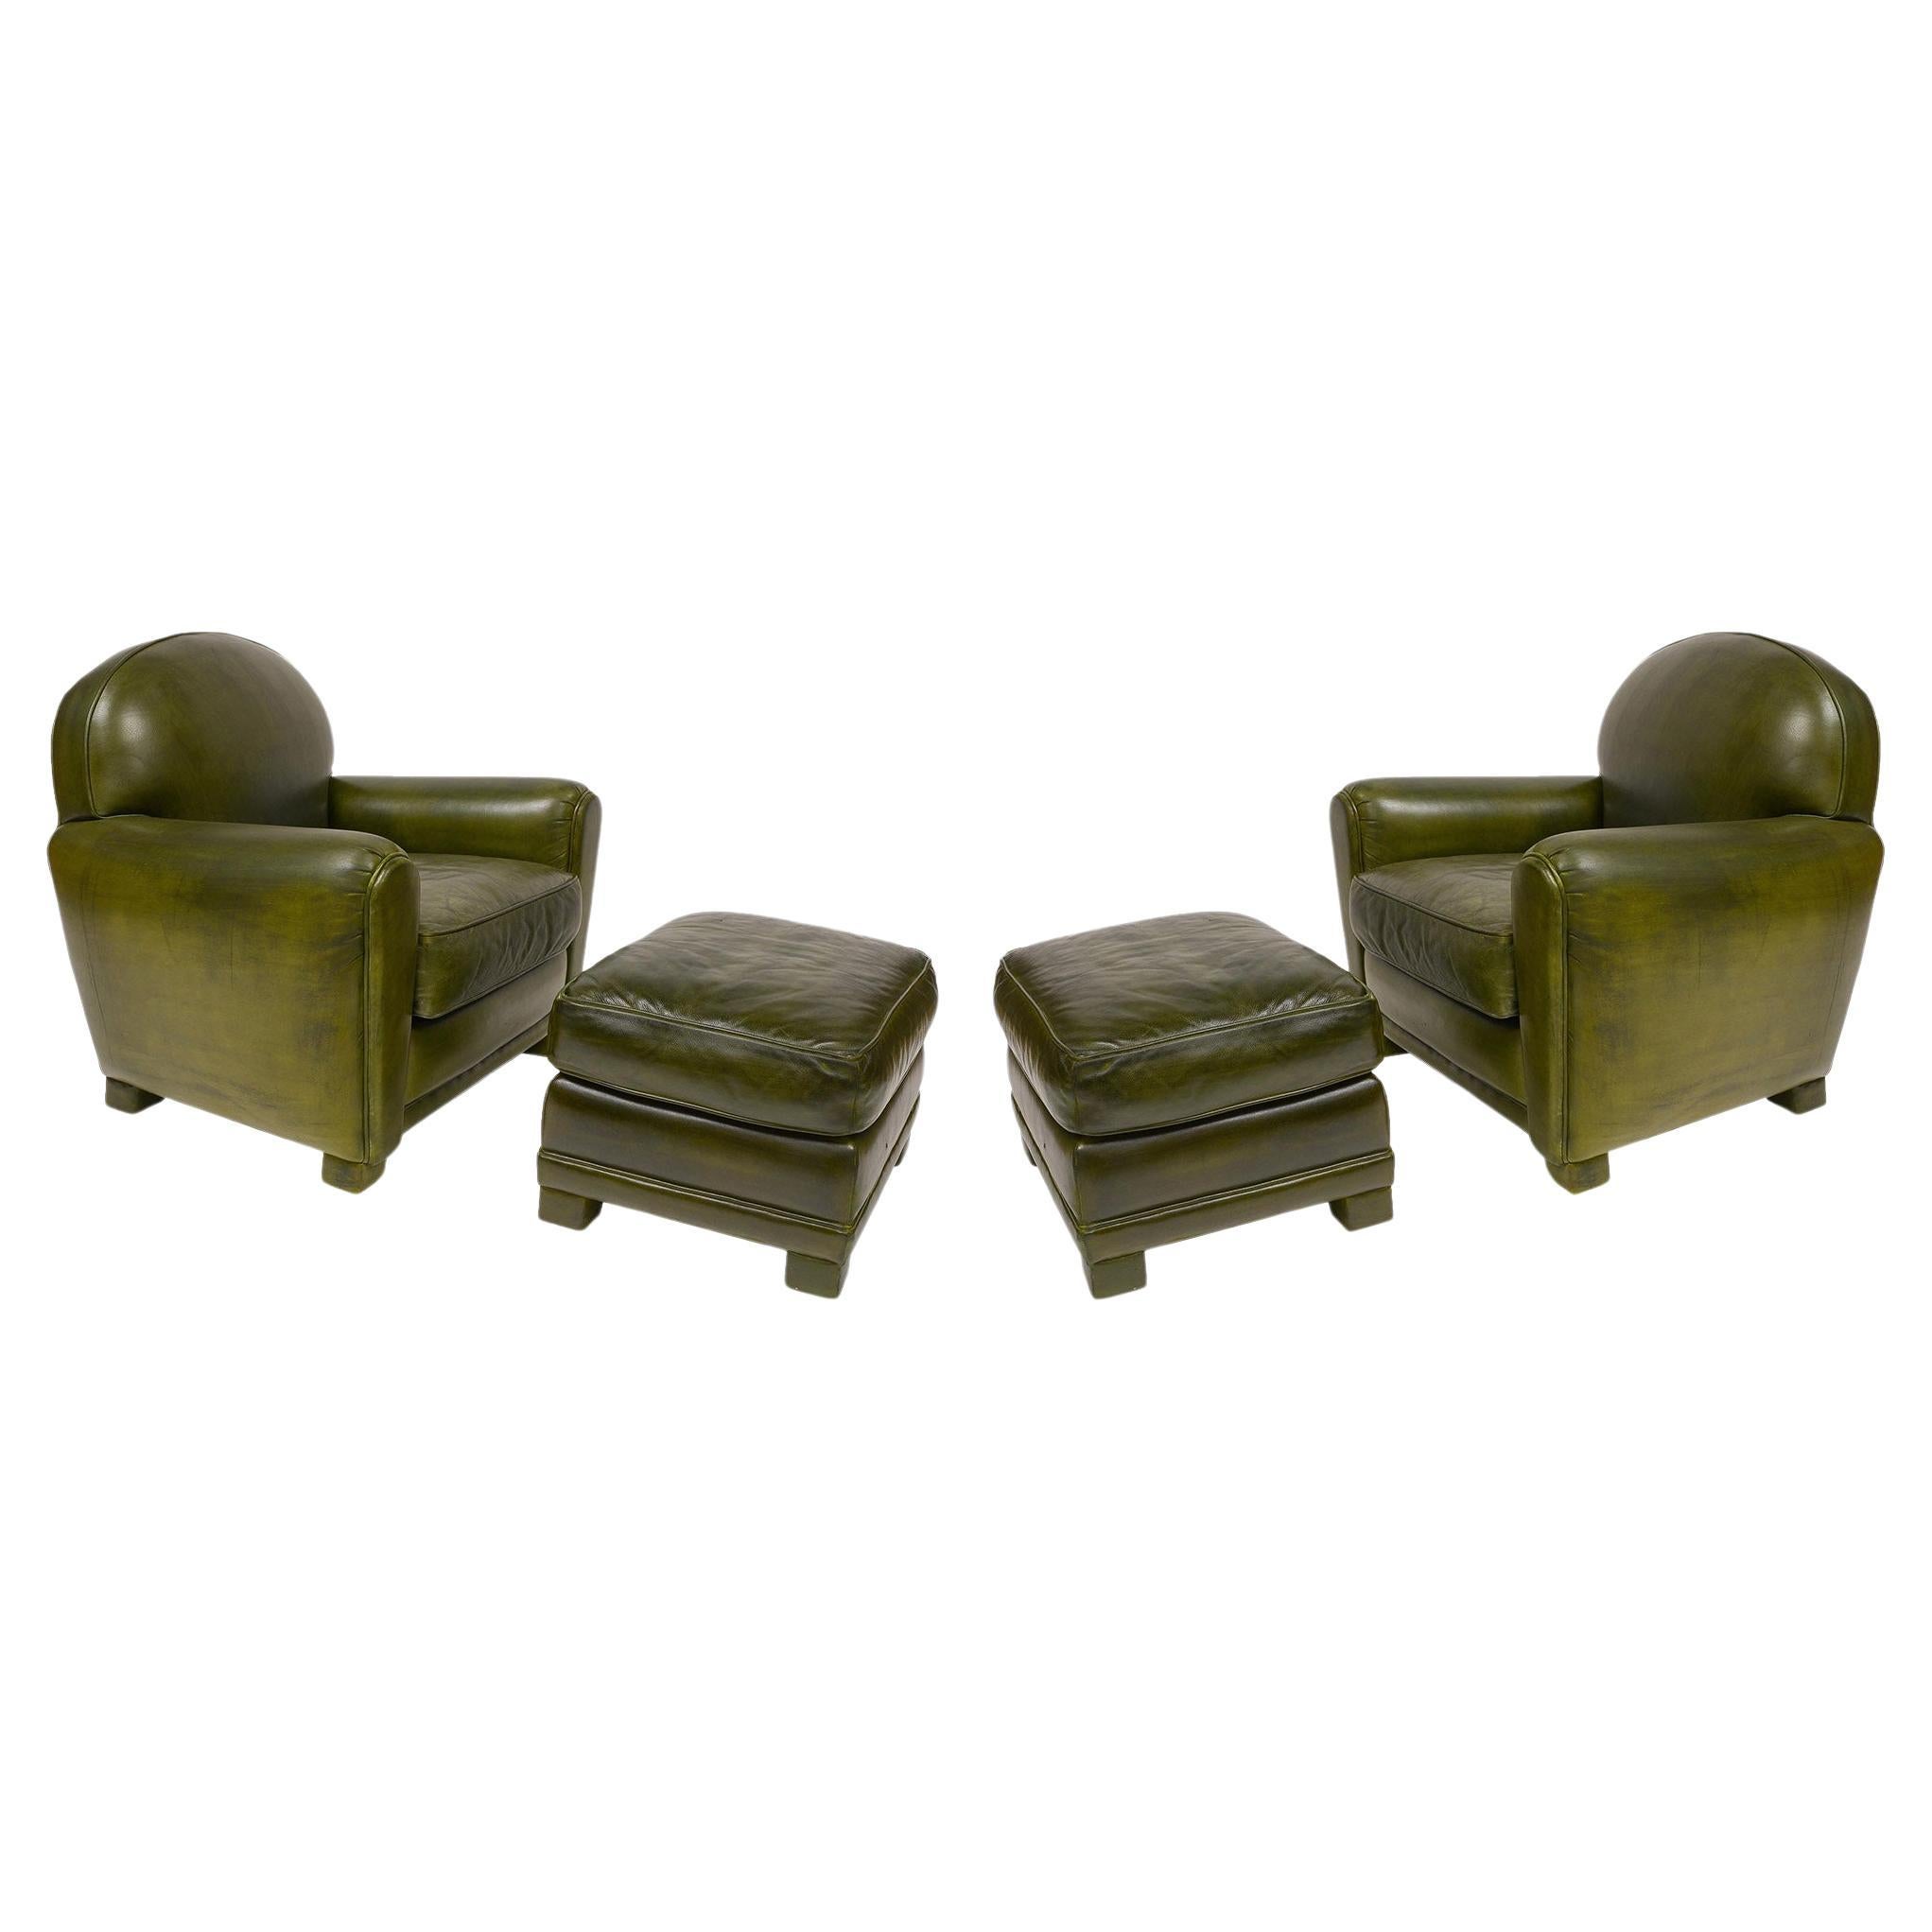 Early 21st Century Green Leather Club Chairs With Ottomans- 4 Pieces For Sale